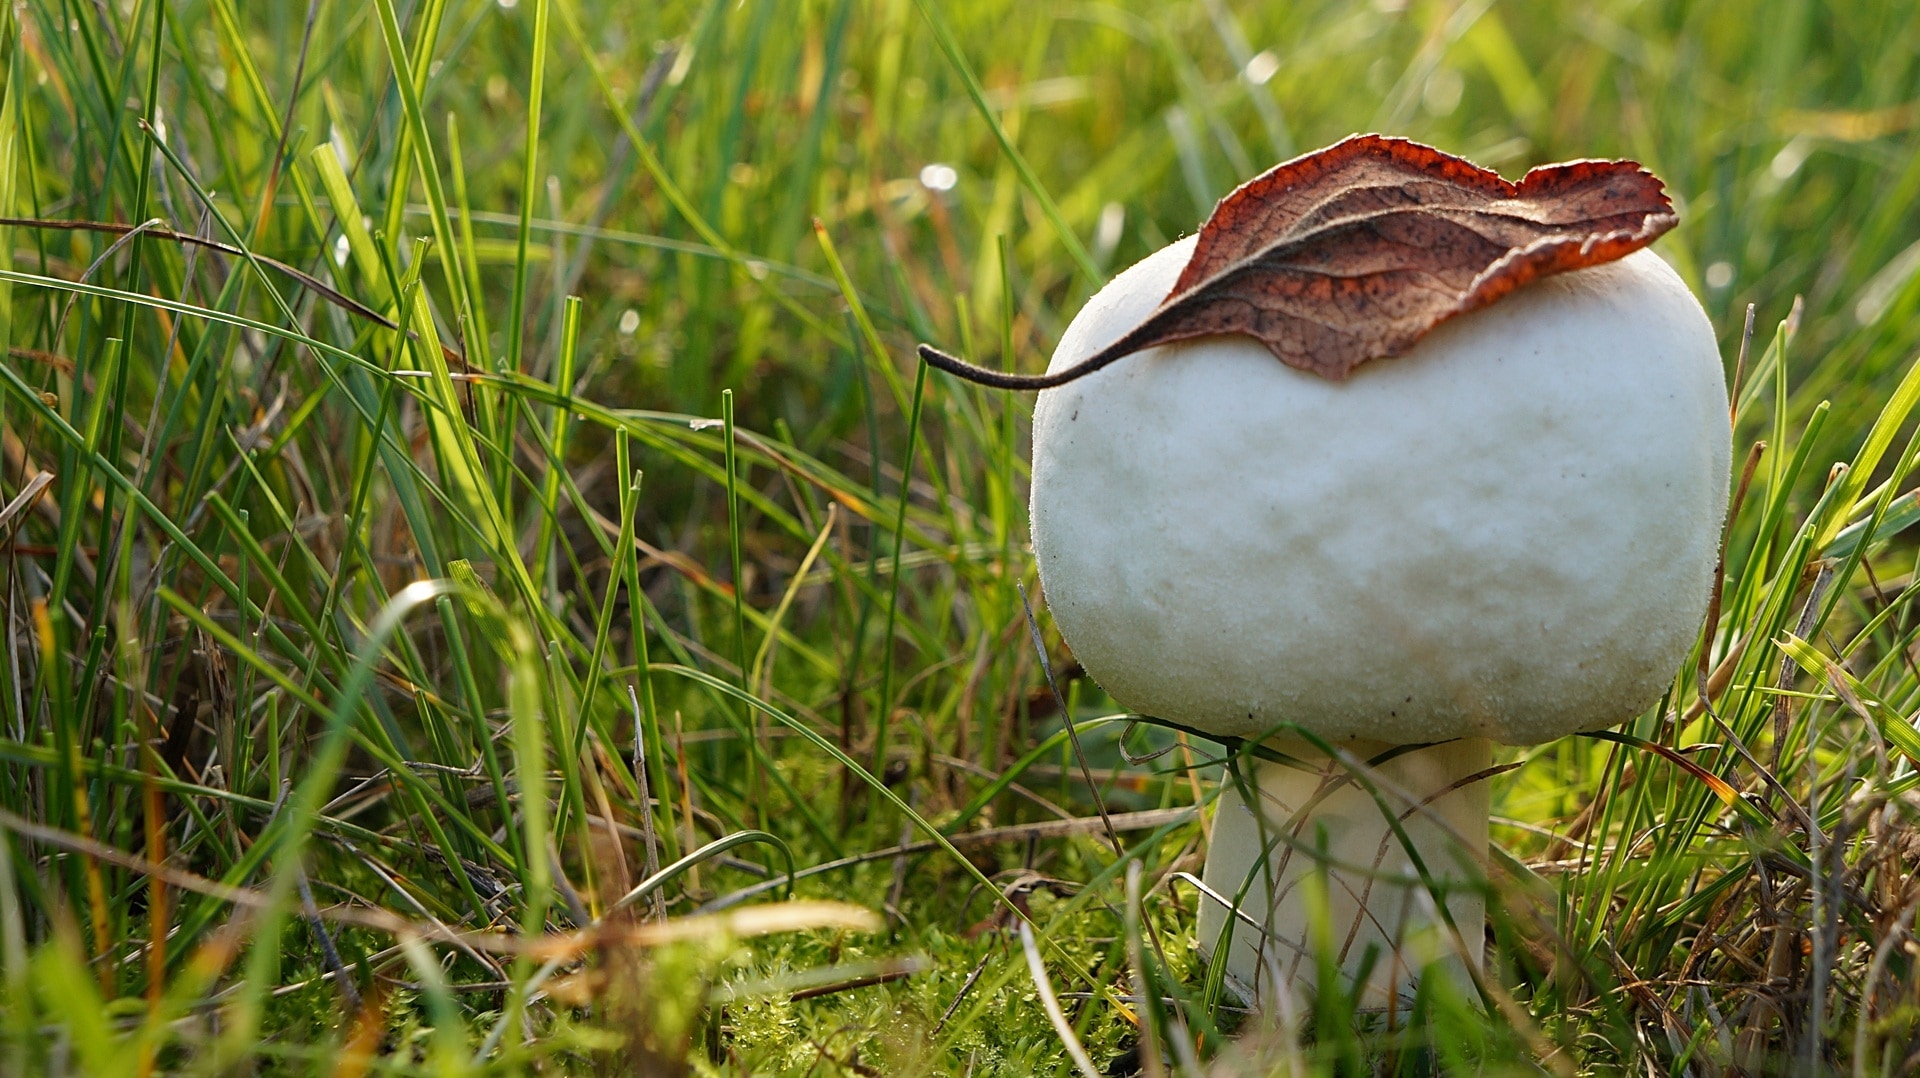 white mushroom and red leaf with green grass field